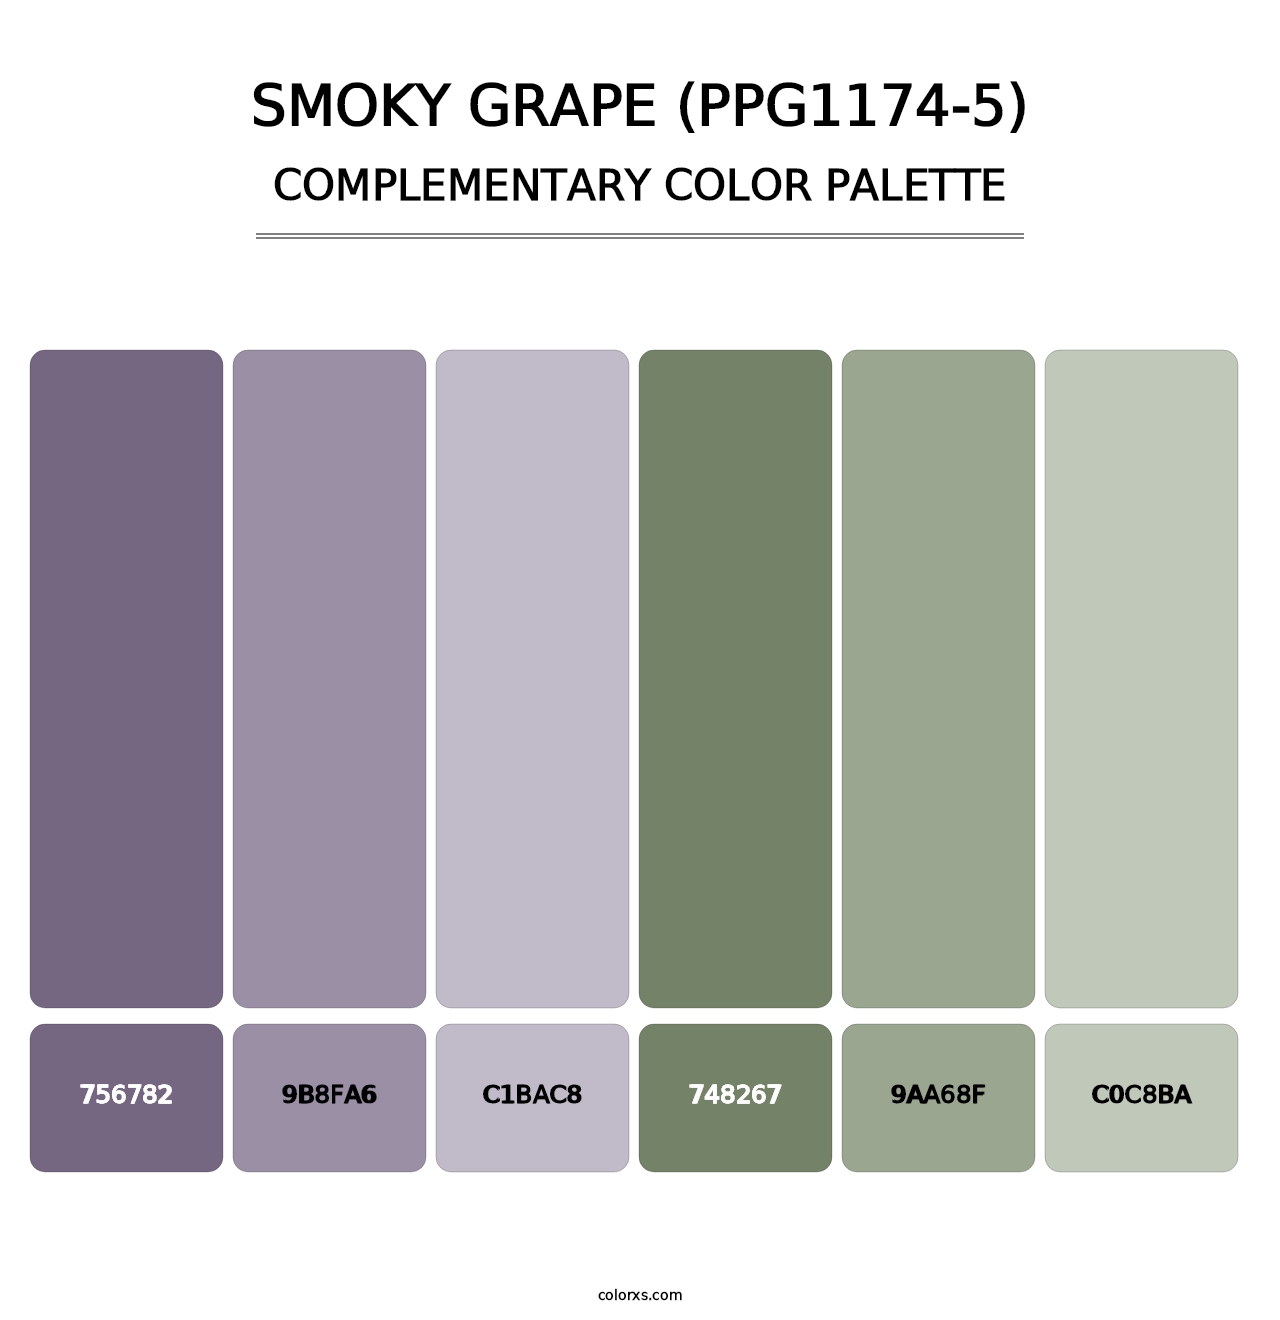 Smoky Grape (PPG1174-5) - Complementary Color Palette